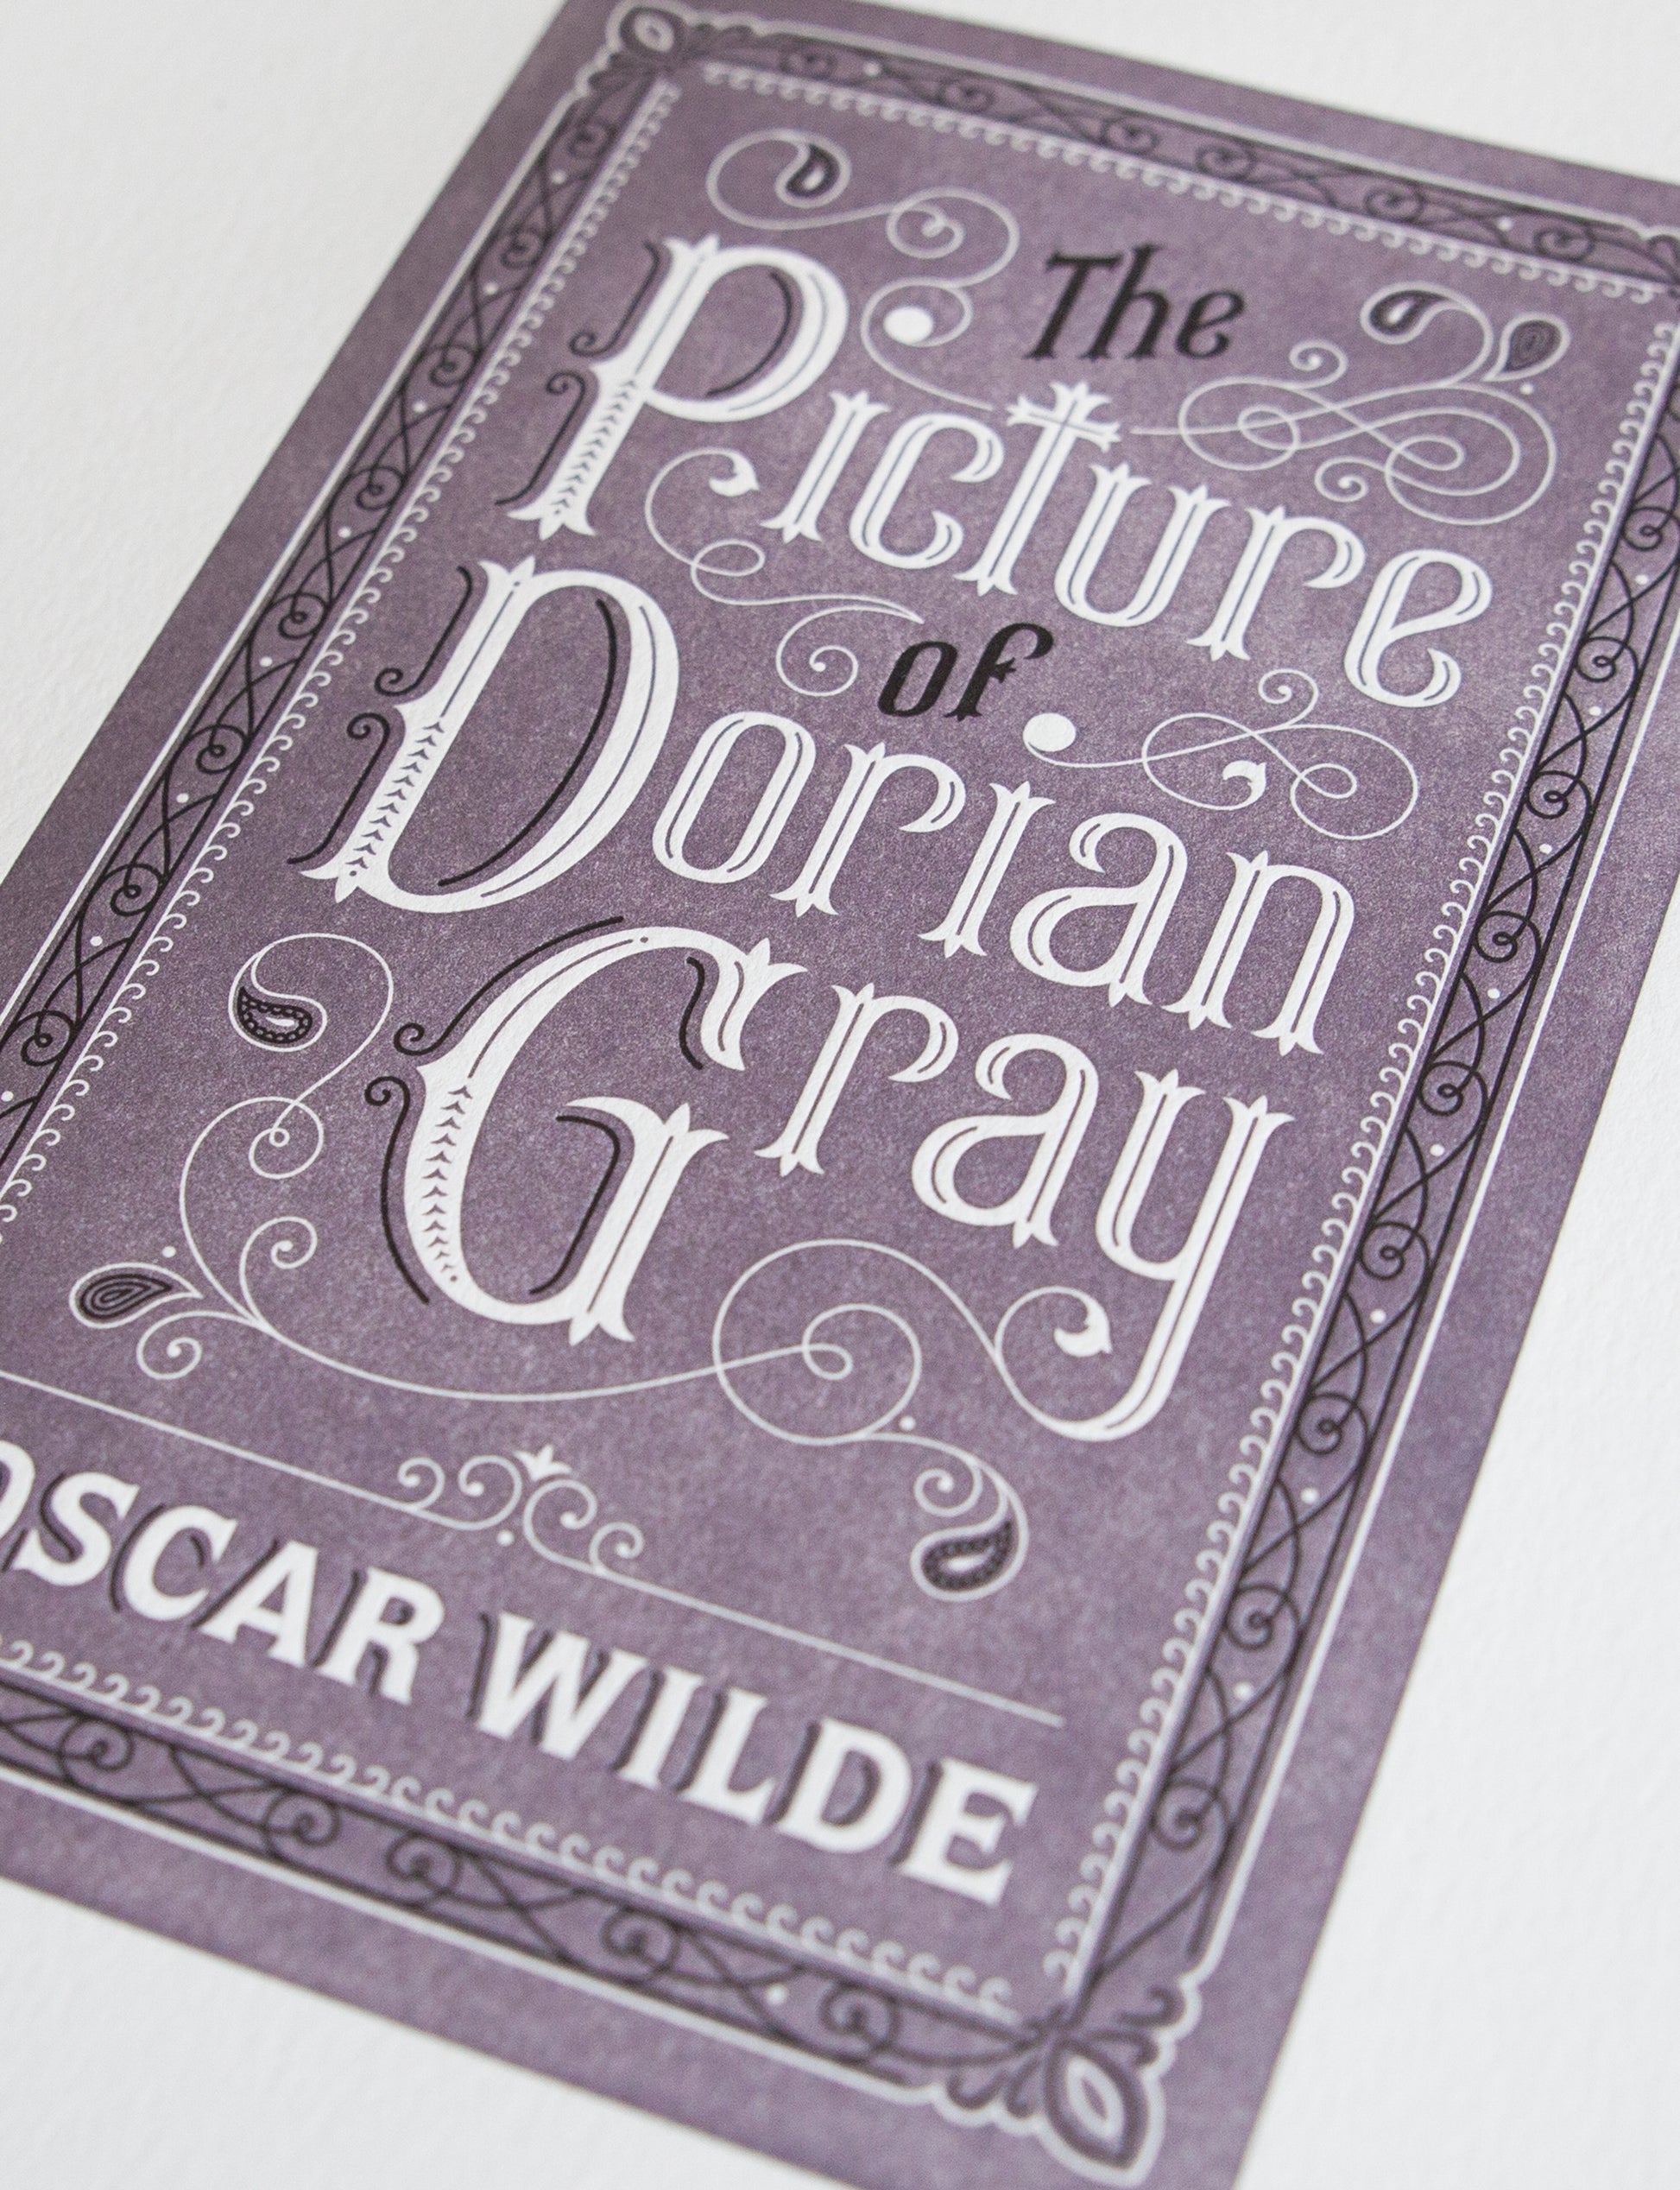 Close-up of a 2-color letterpress print in violet and black. Printed artwork is an illustrated book cover of The Picture of Dorian Gray including custom hand lettering.